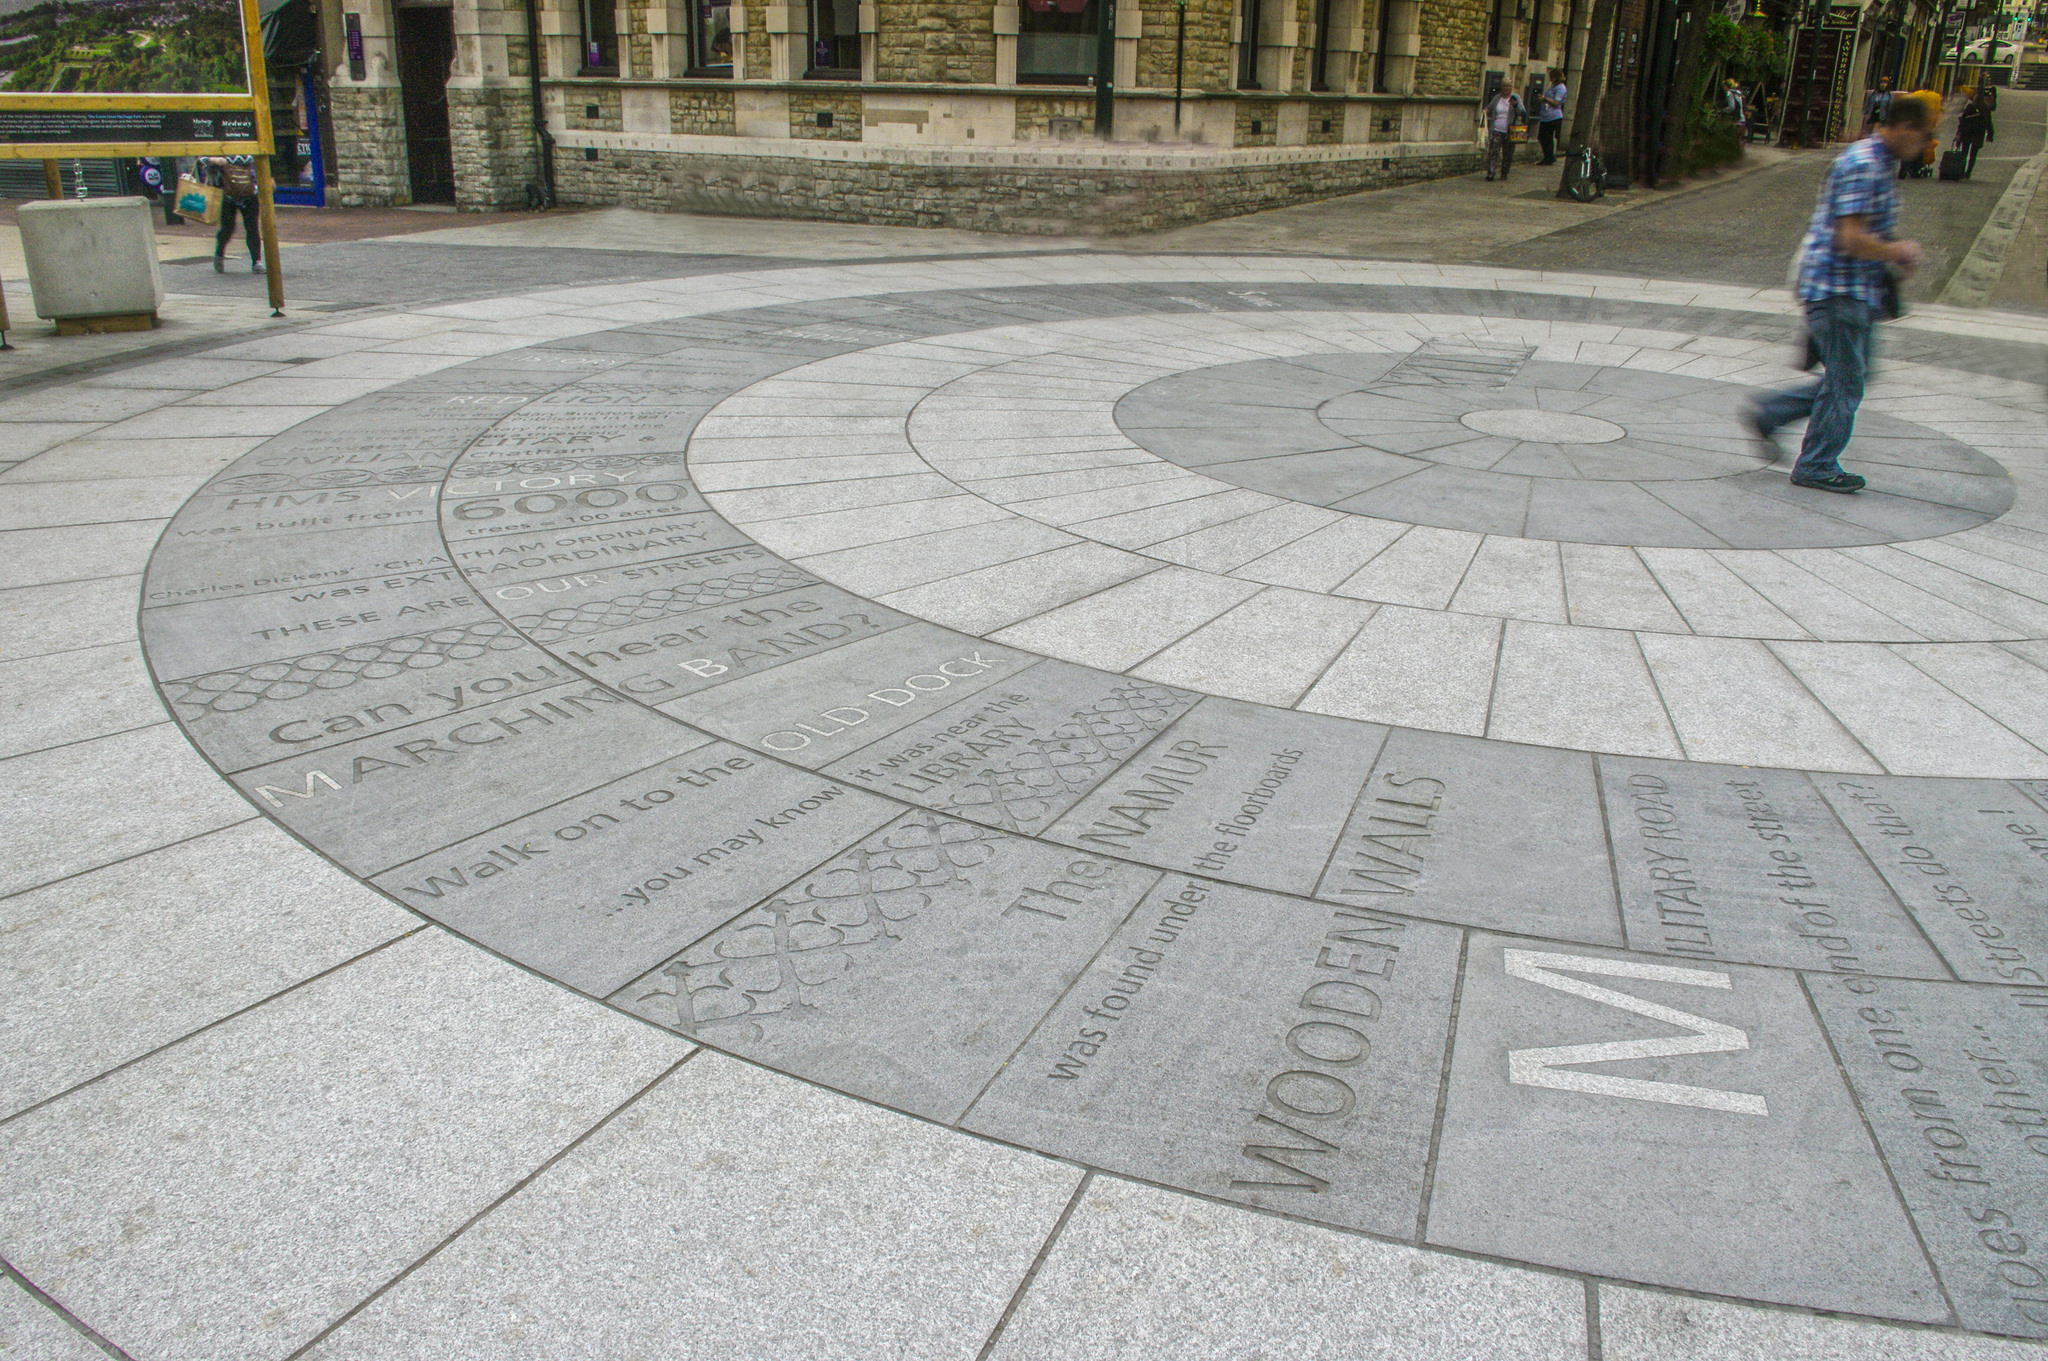 Circular granite feature artwork showing light and dark grey granite with embedded and sandblasted text and pattern work